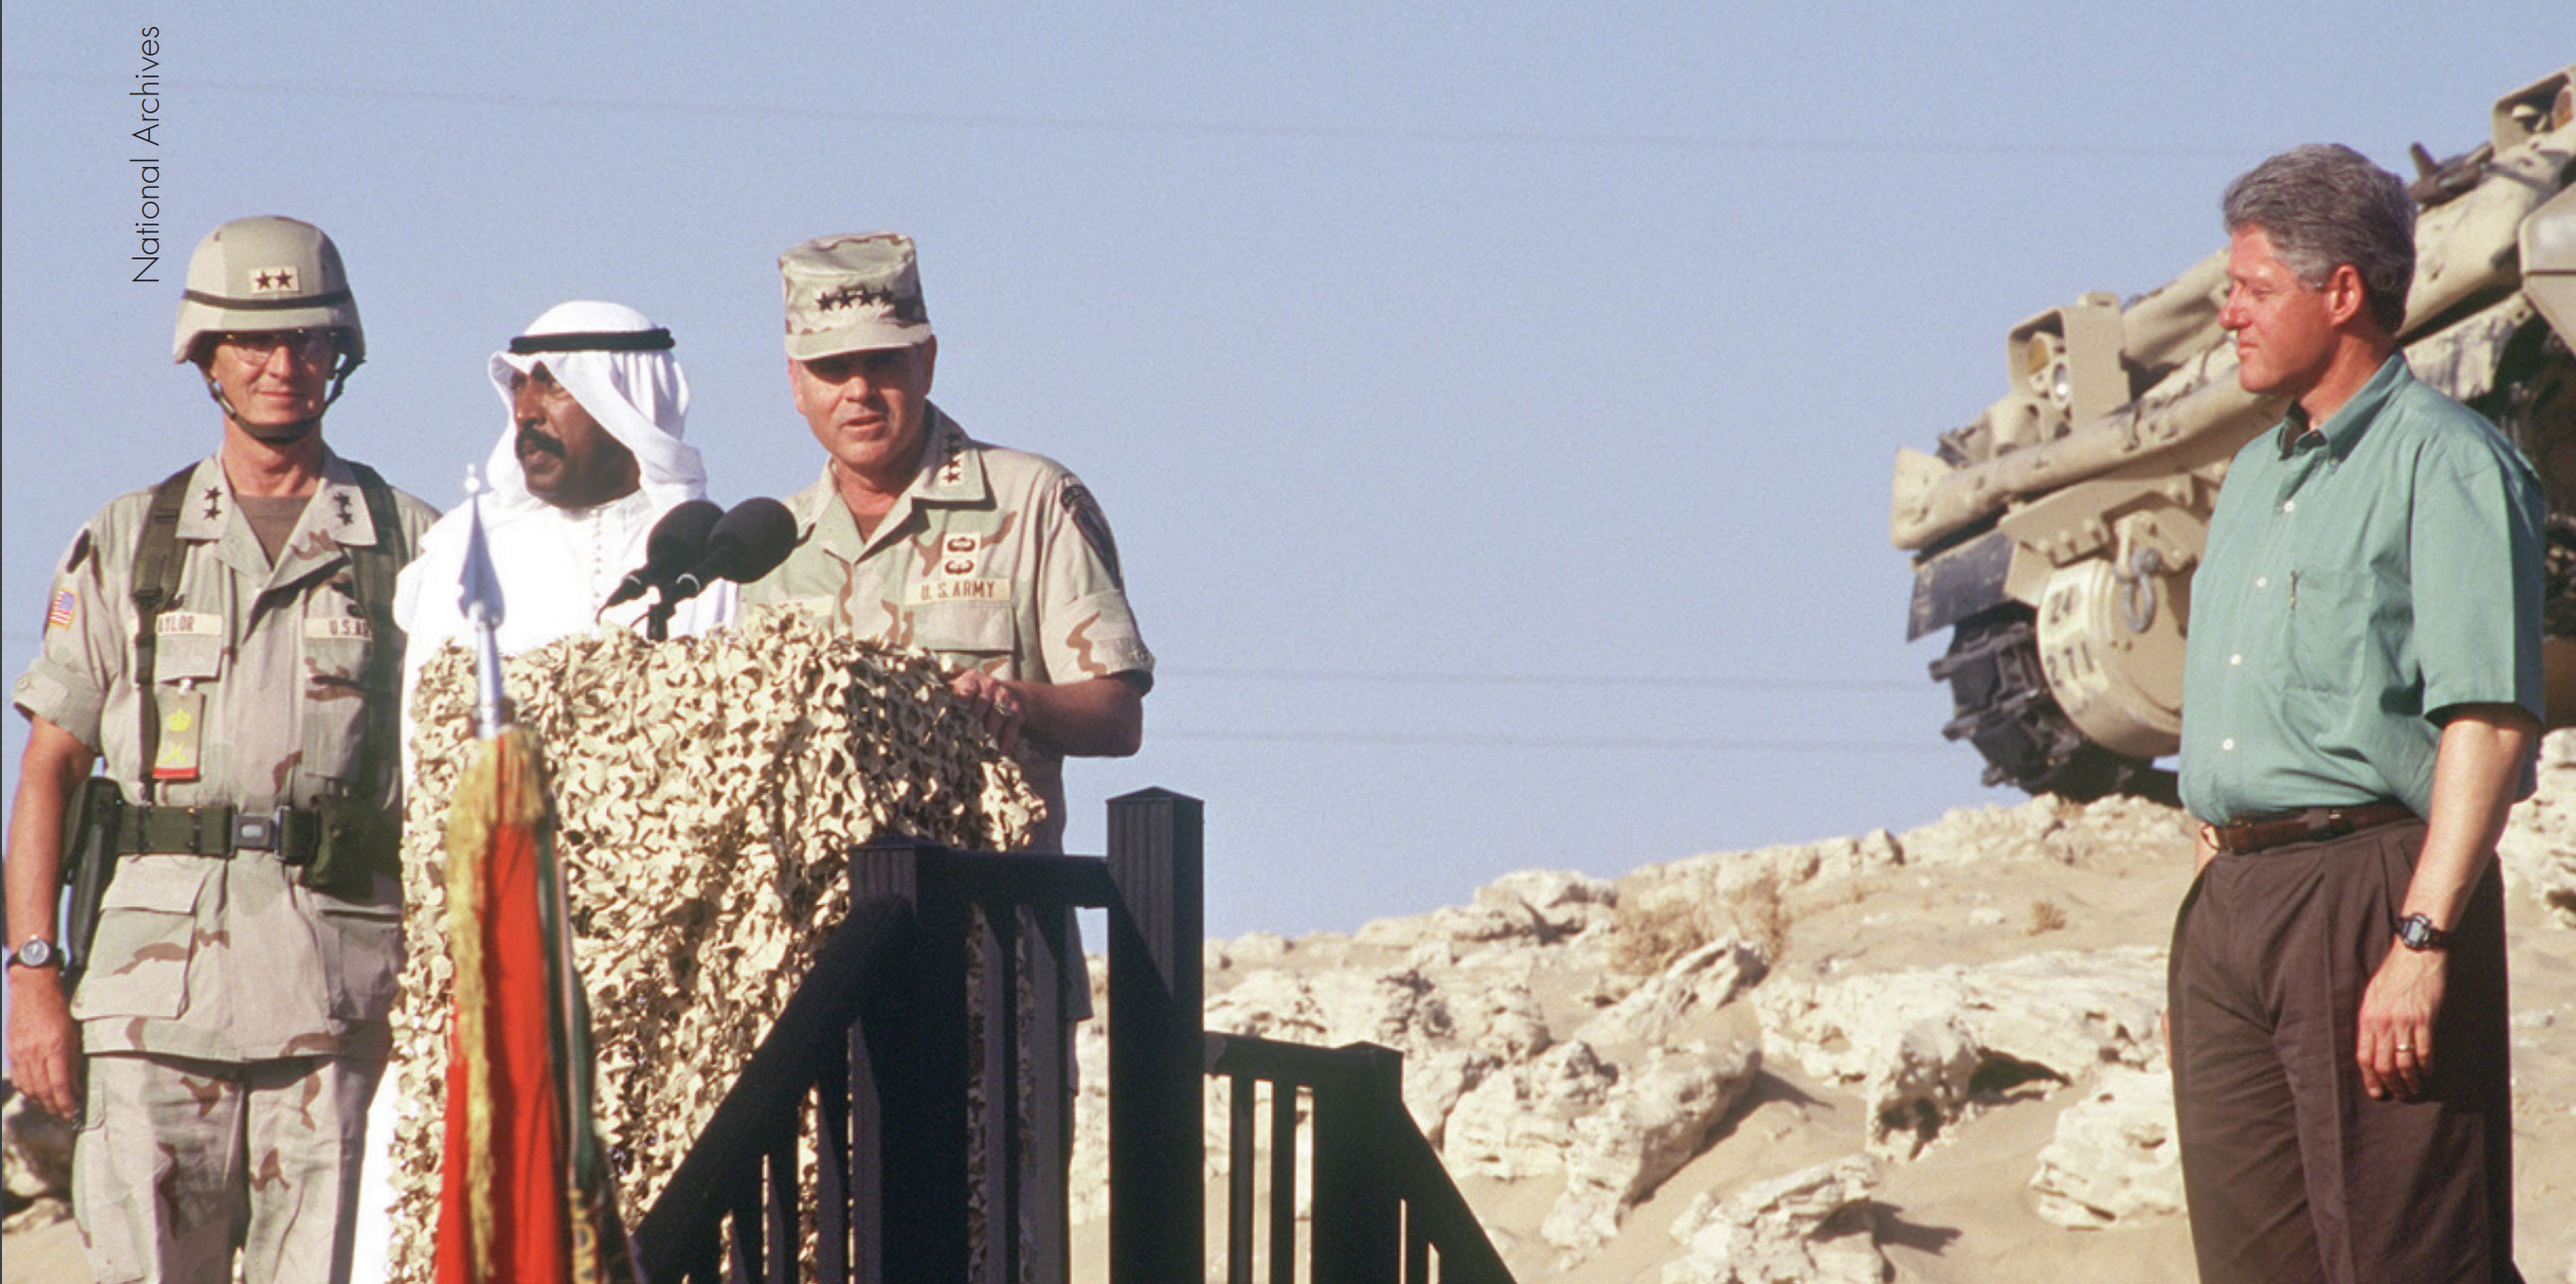 (From left to right) General Taylor; Saad Al-Salim Al-Sabah, the crown prince of Kuwait; General Peay; and President Clinton address troops during Operation Vigilant Warrior.